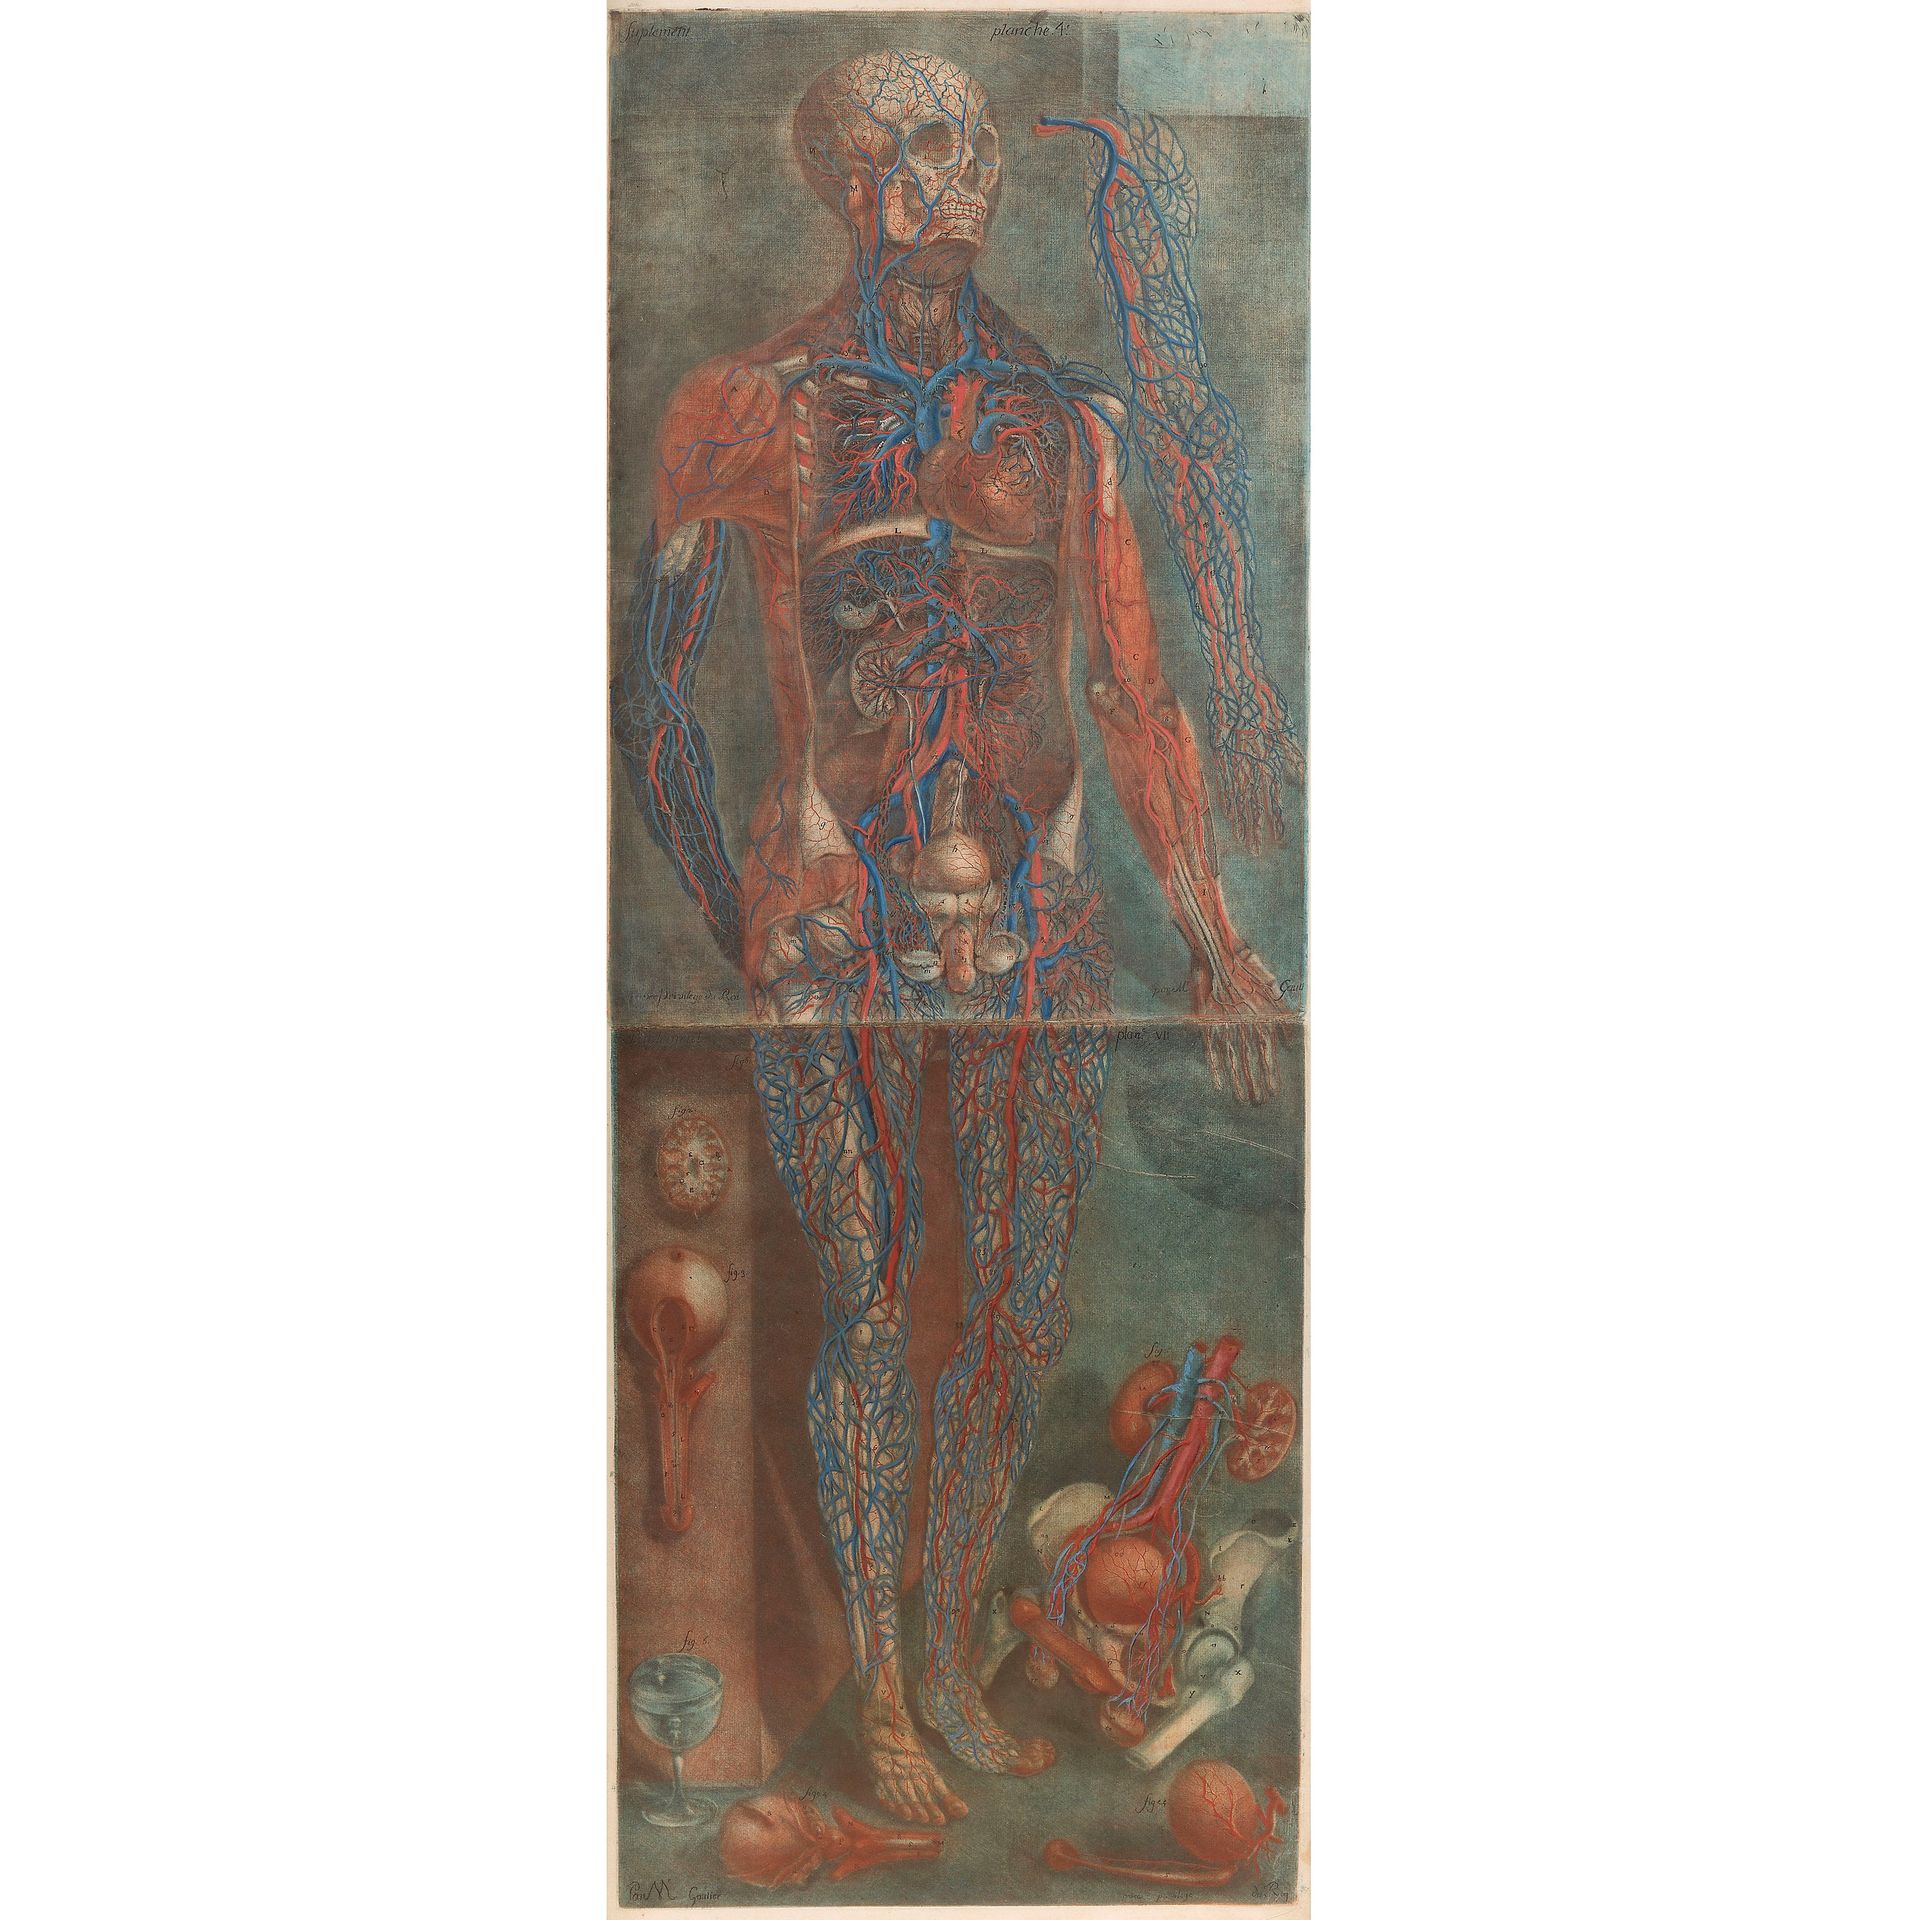 Null JACQUES-FABIEN GAUTIER DAGOTY

(1710-1781)

Dissected man 

Dissected plate&hellip;